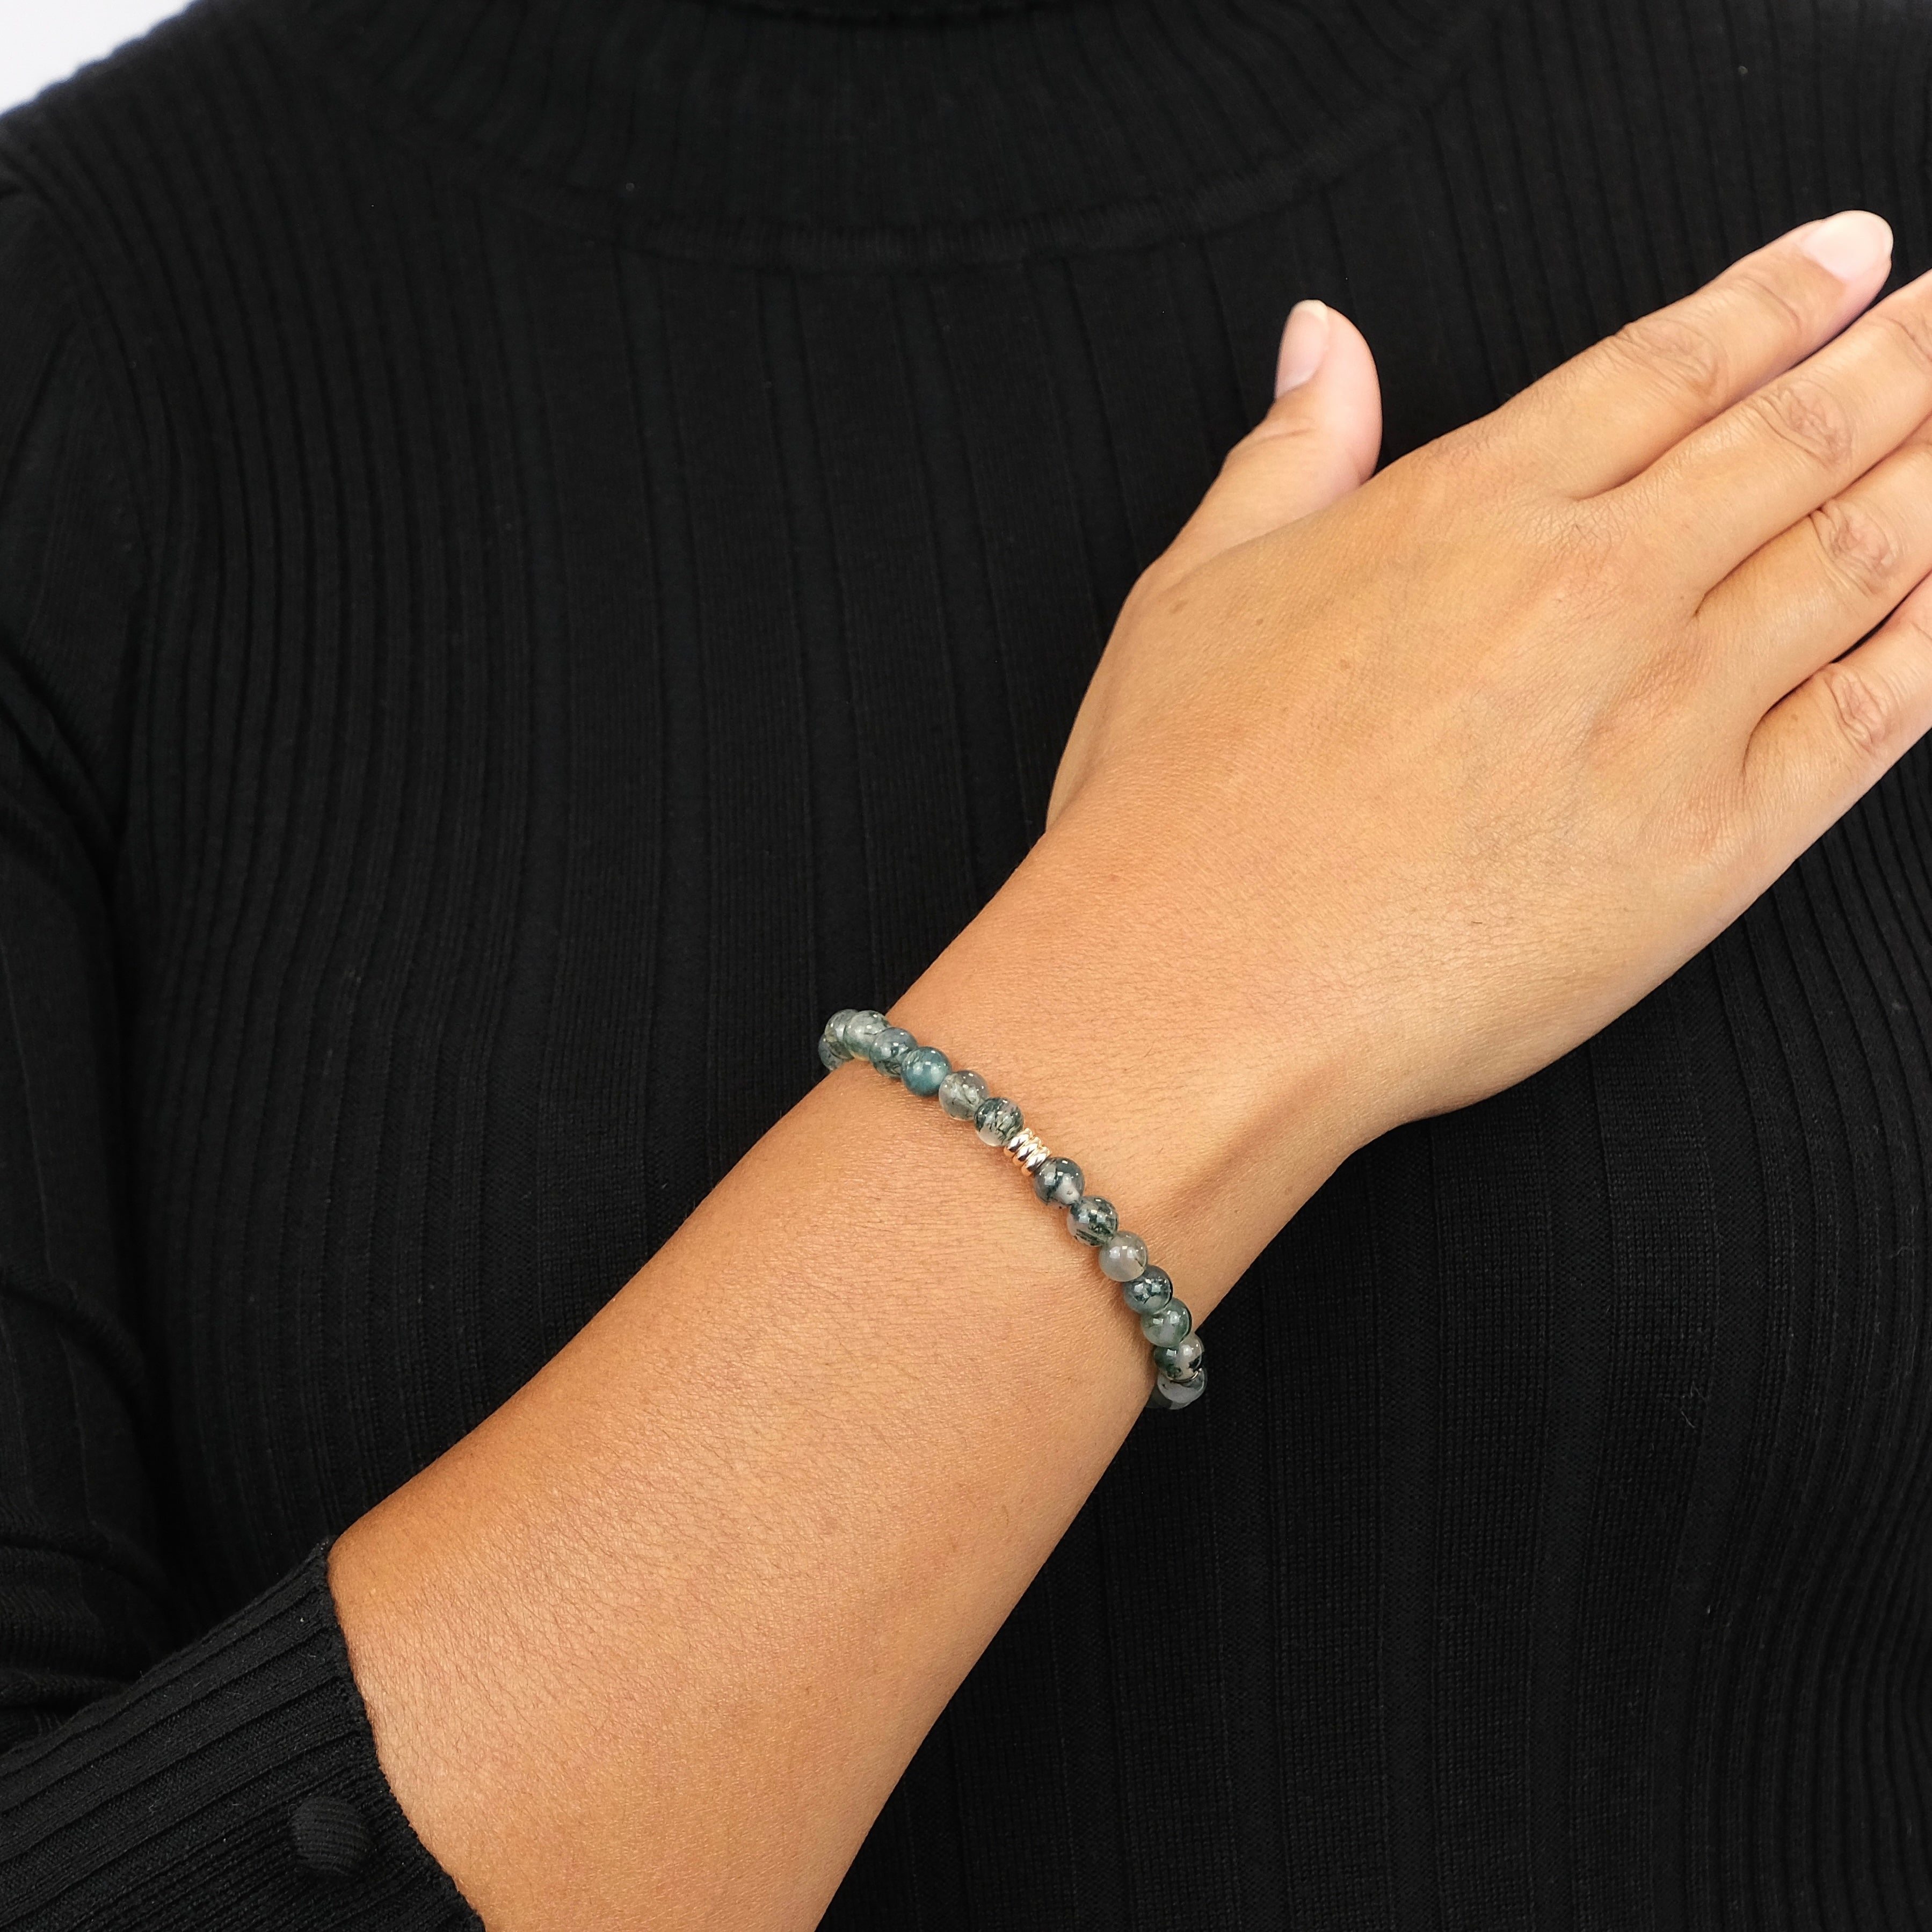 A model wearing a Moss agate gemstone bracelet in 6mm beads with gold accessories